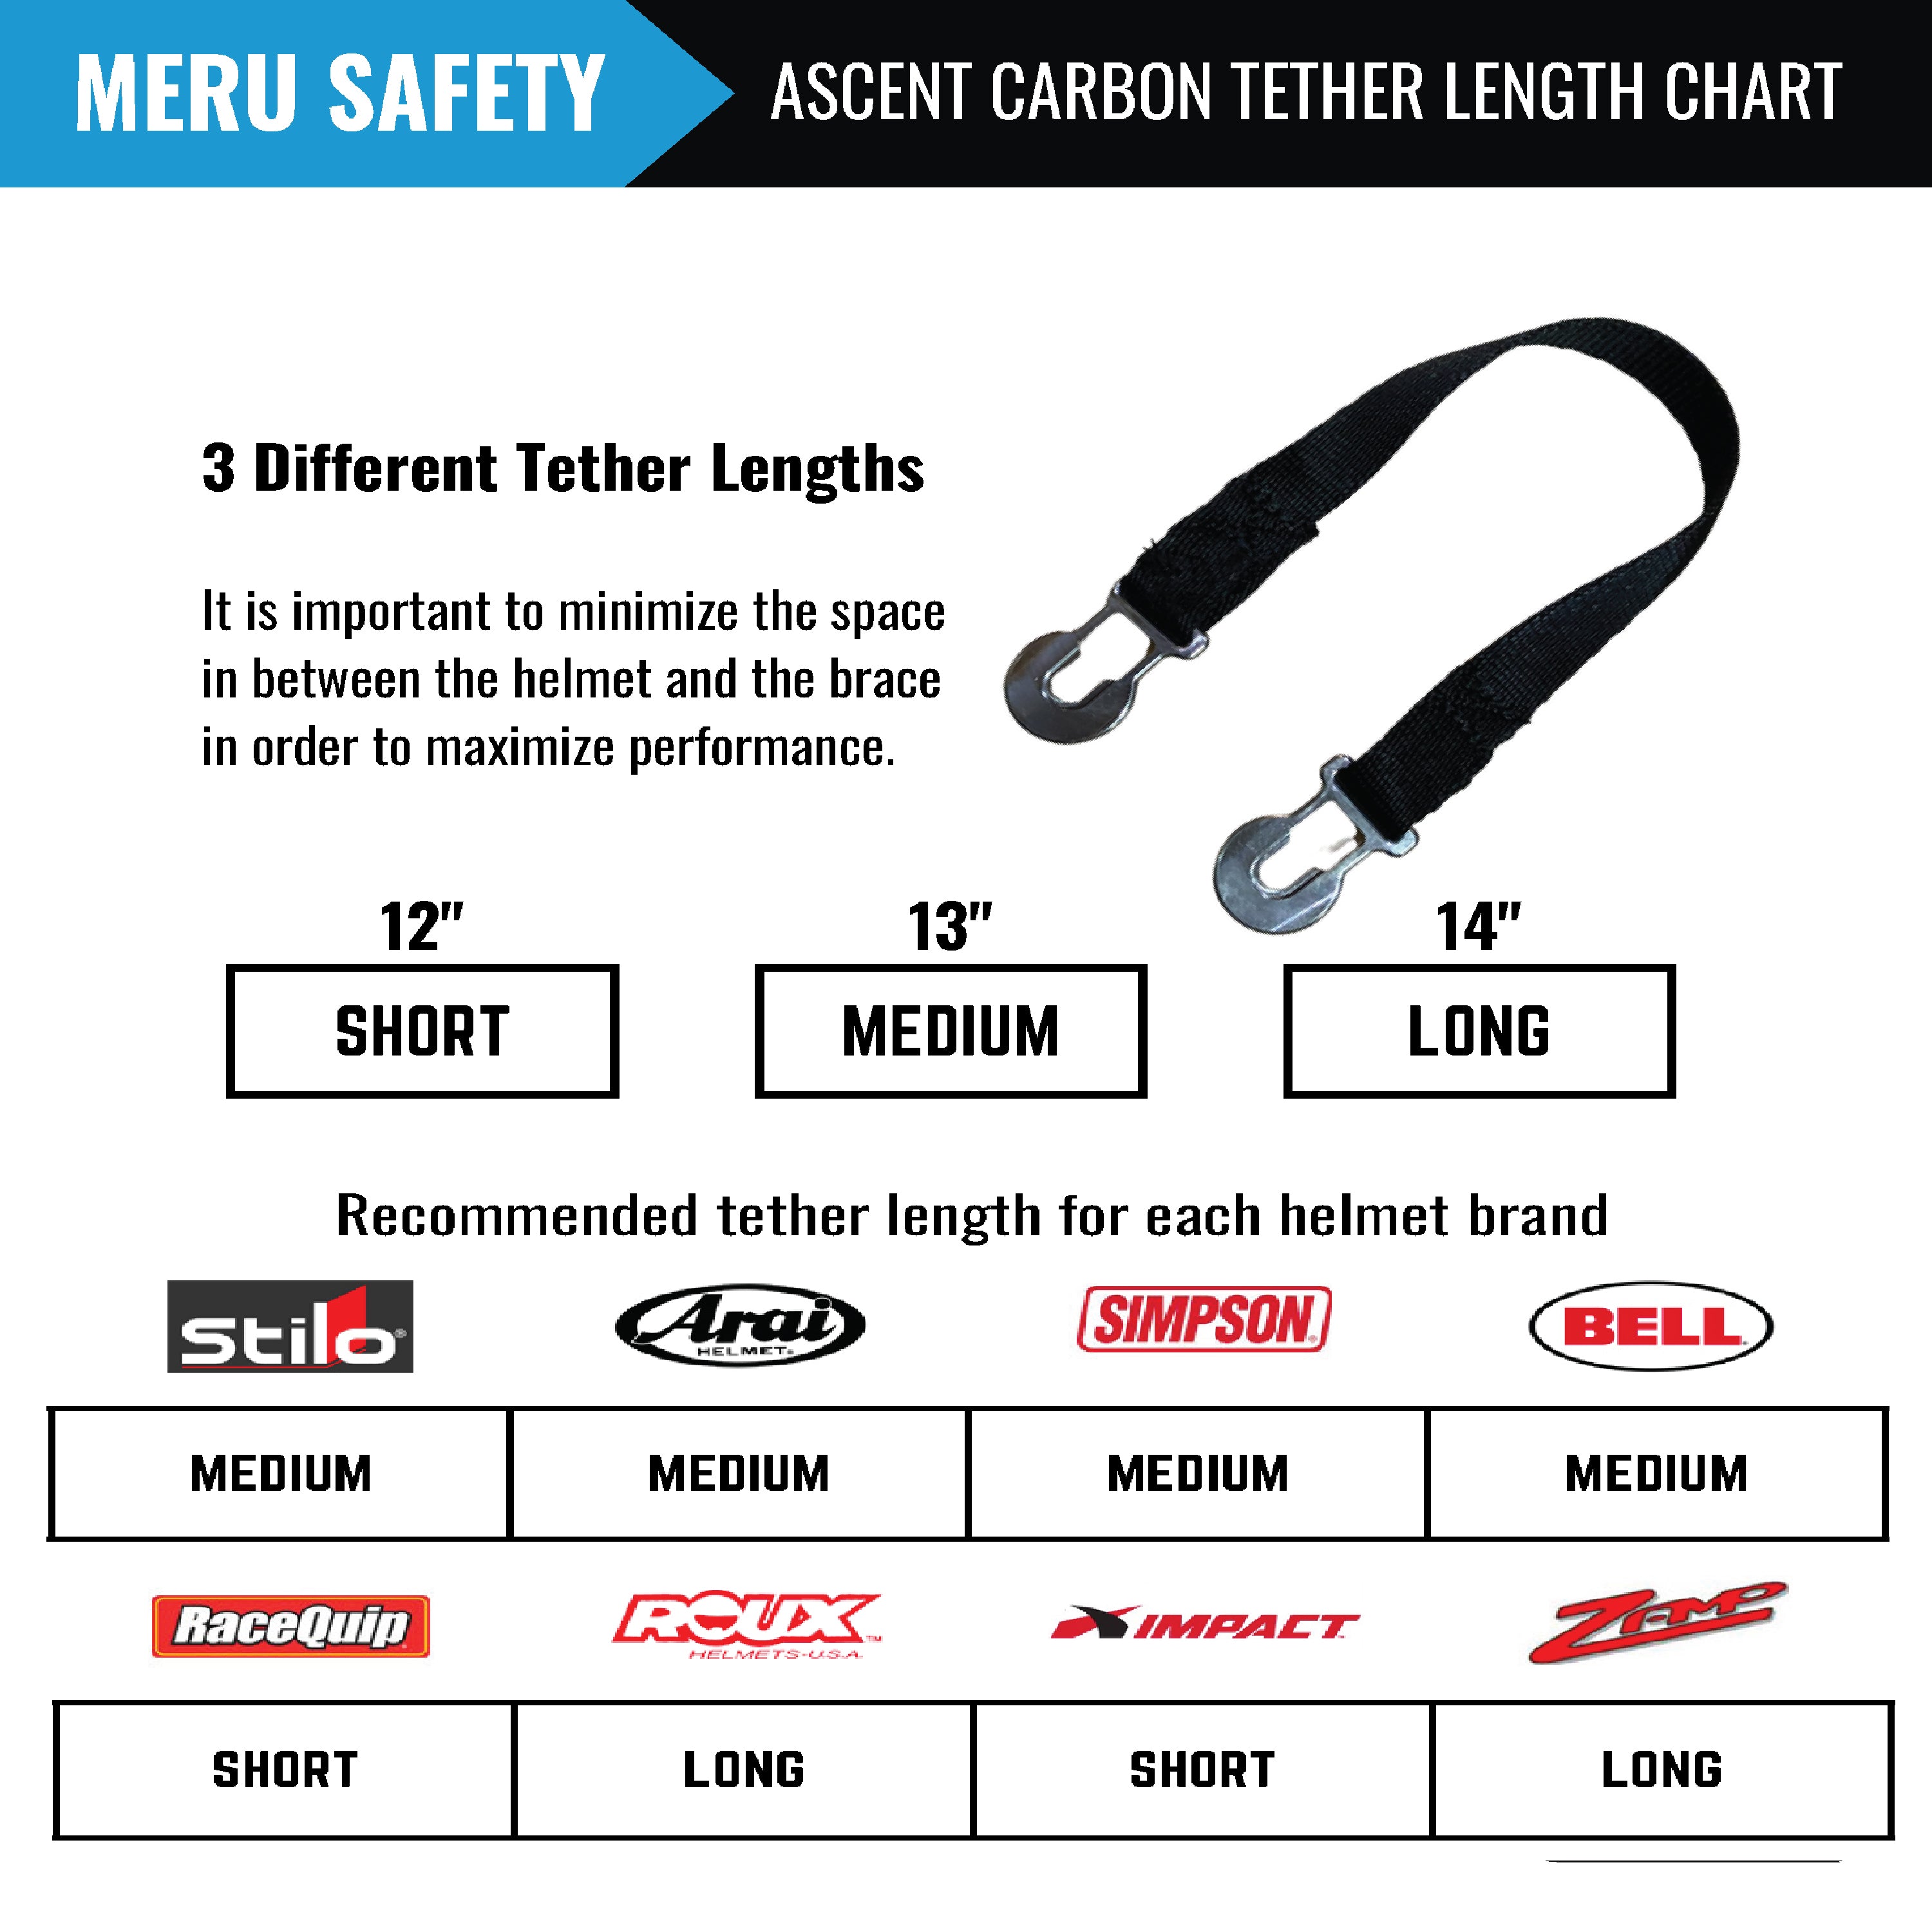 Meru Safety Racing Ascent Carbon Head & Neck Restraint with Quick Release Tethers & Shock Absorber Reduces Force from Frontal Impacts (Small/Medium)